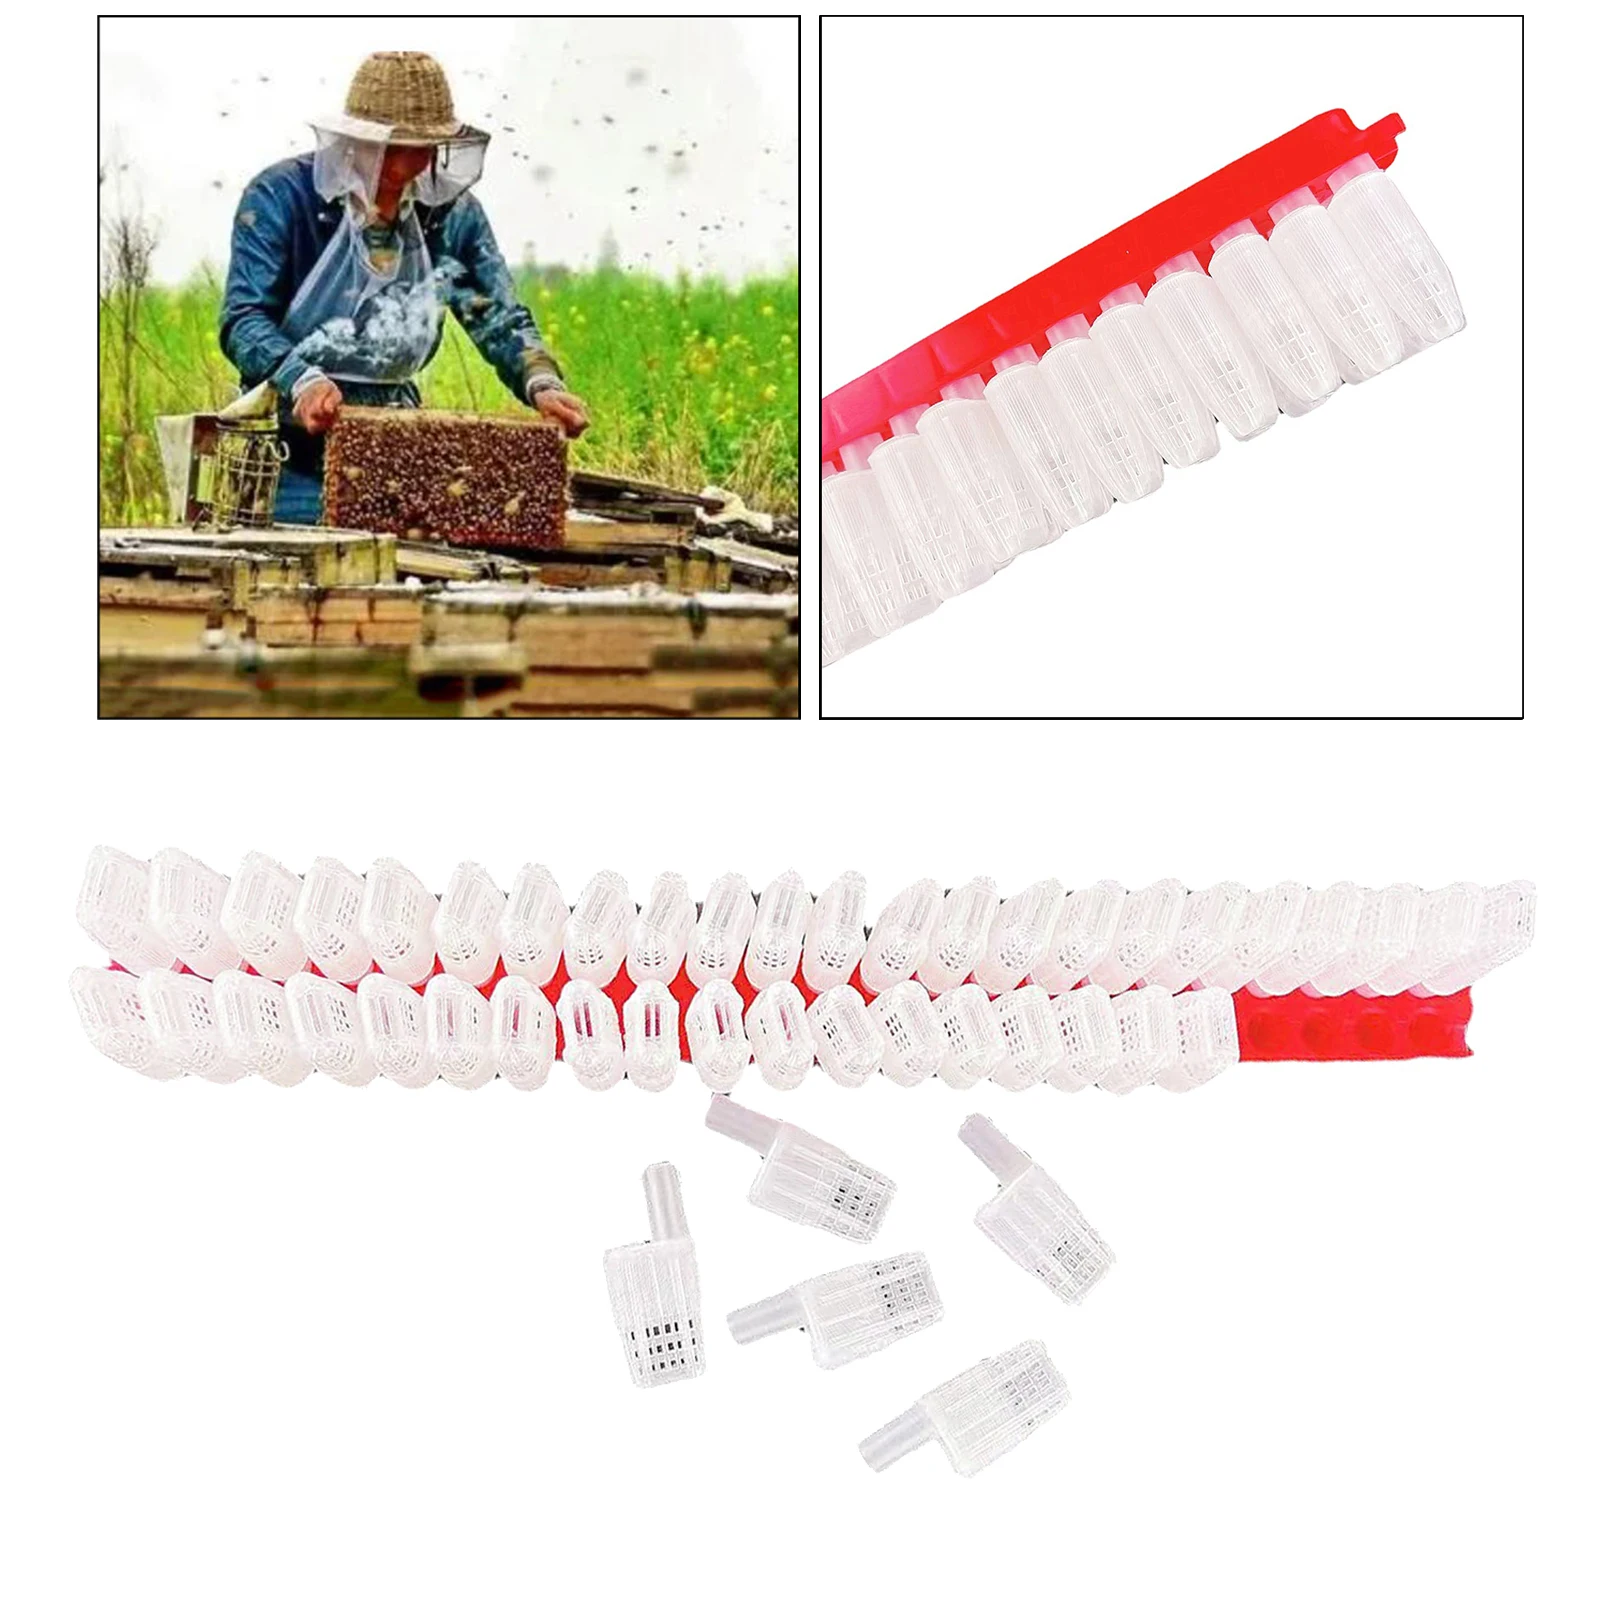 46Pcs Queen Bee Transporting Moving Isolator Hive Cage Catcher Protection Case w/ Transportation Strip Beekeeping Supplies